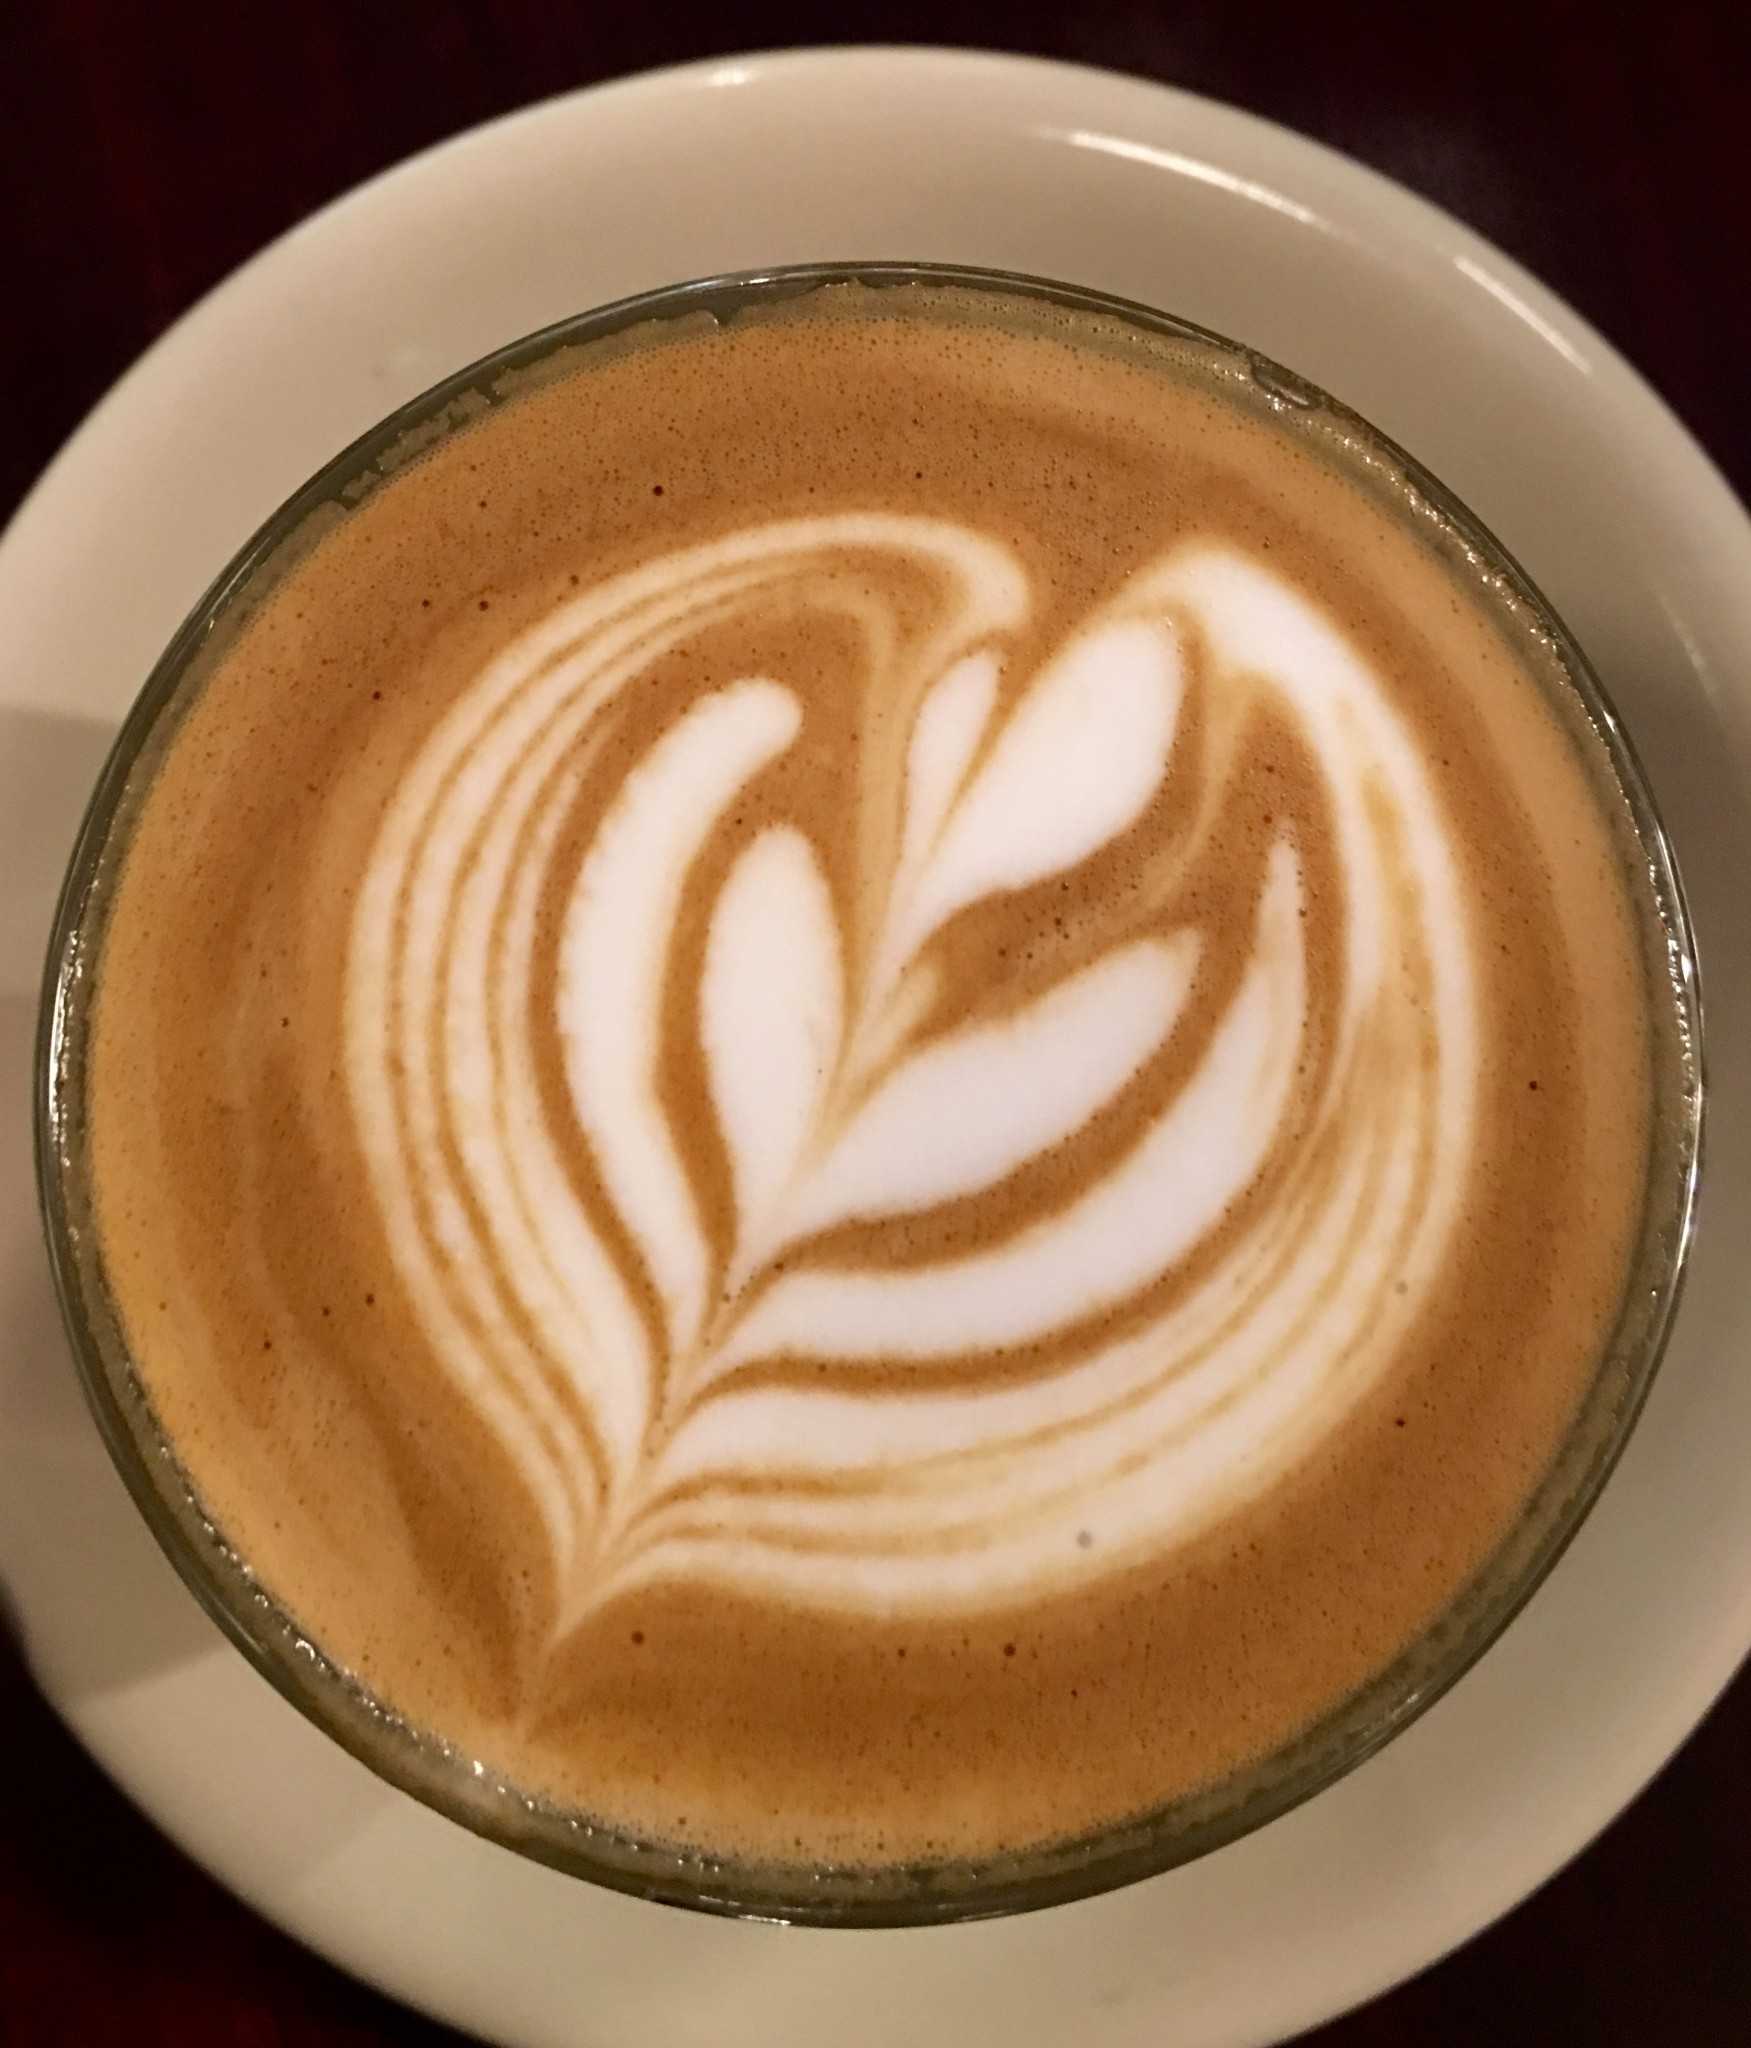 A Cortado from Starry Night.